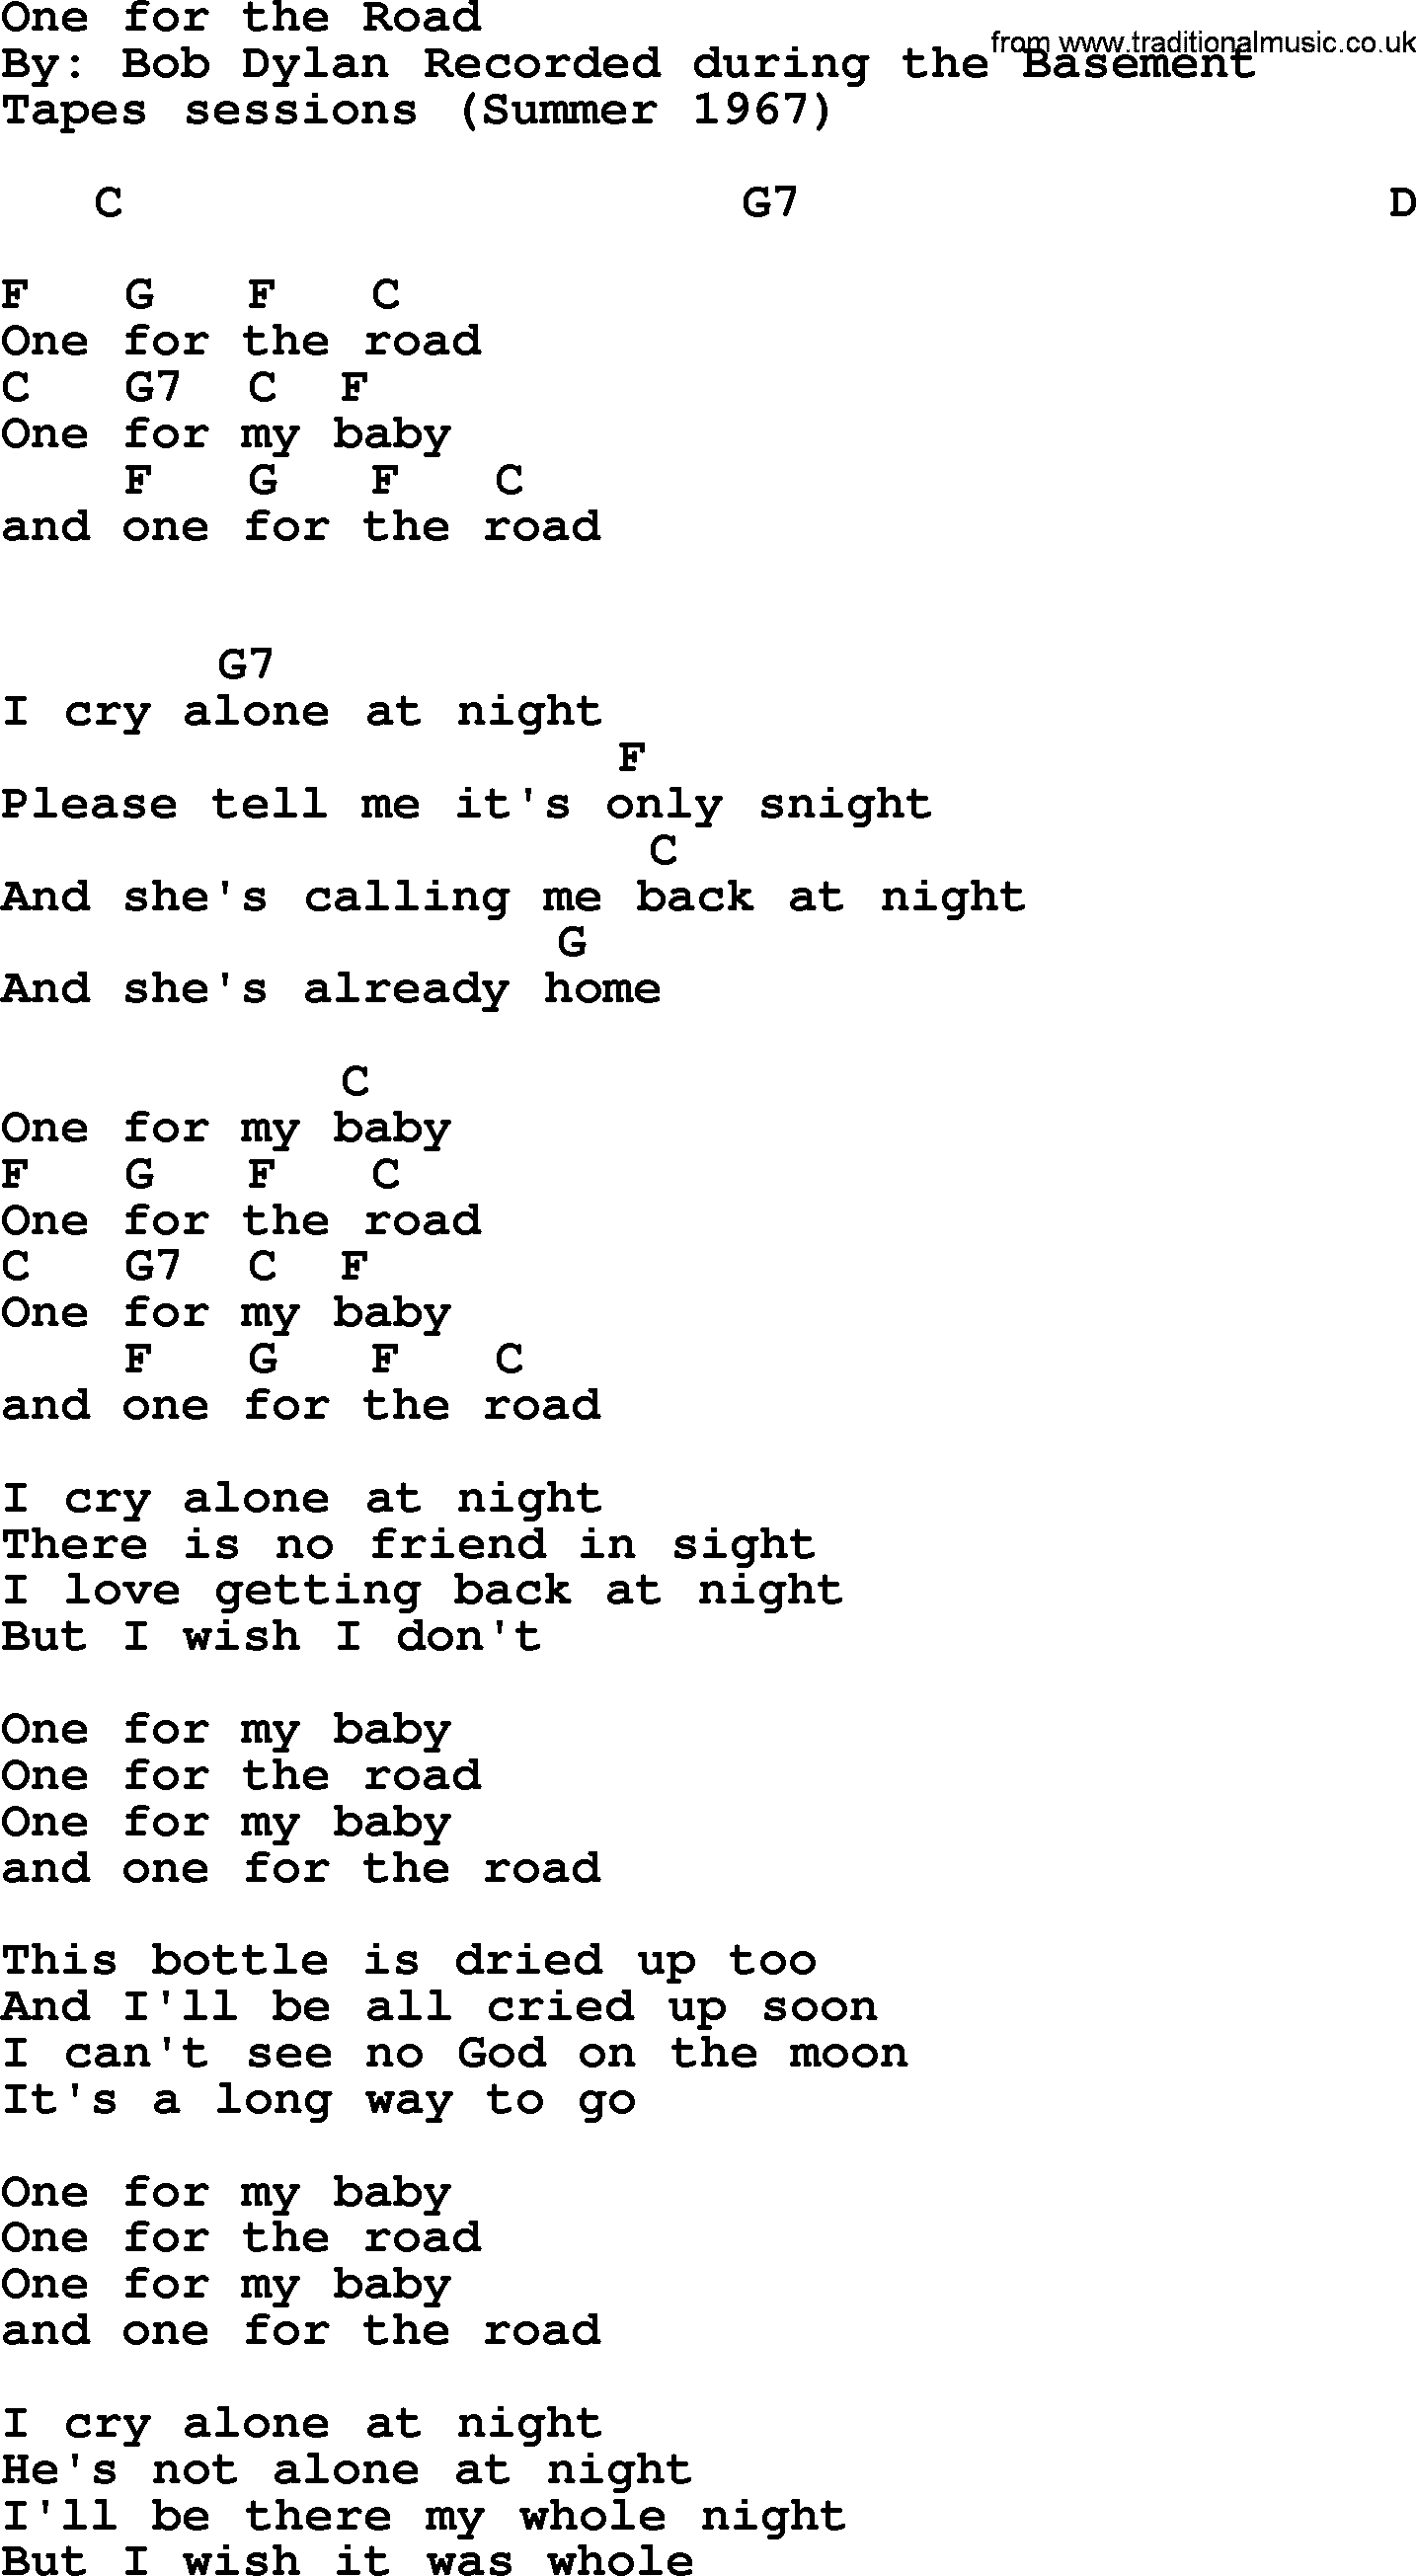 Bob Dylan song, lyrics with chords - One for the Road